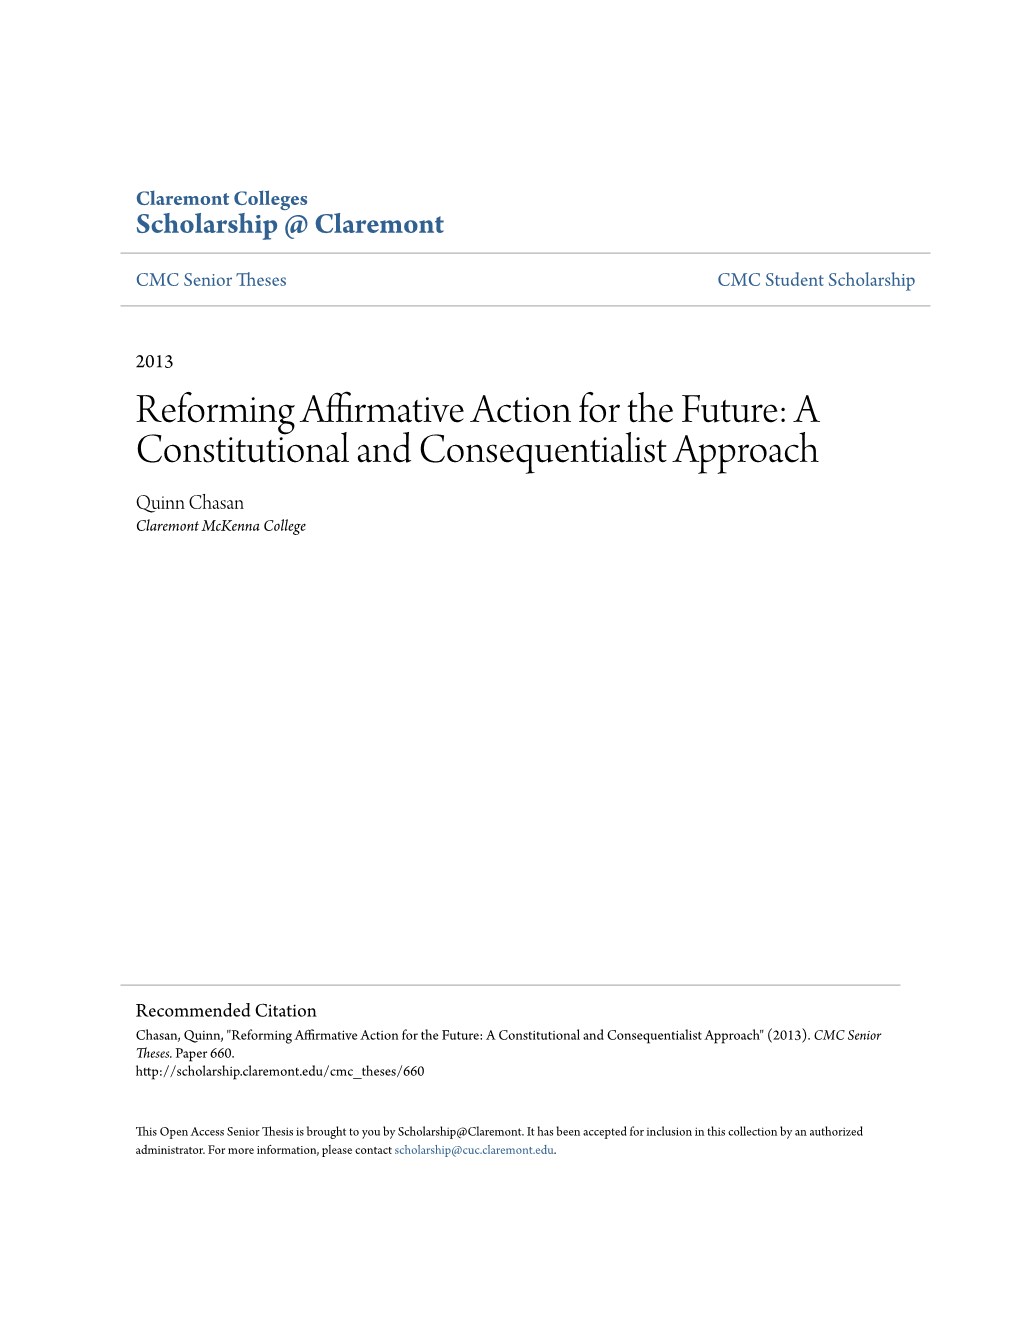 Reforming Affirmative Action for the Future: a Constitutional and Consequentialist Approach Quinn Chasan Claremont Mckenna College